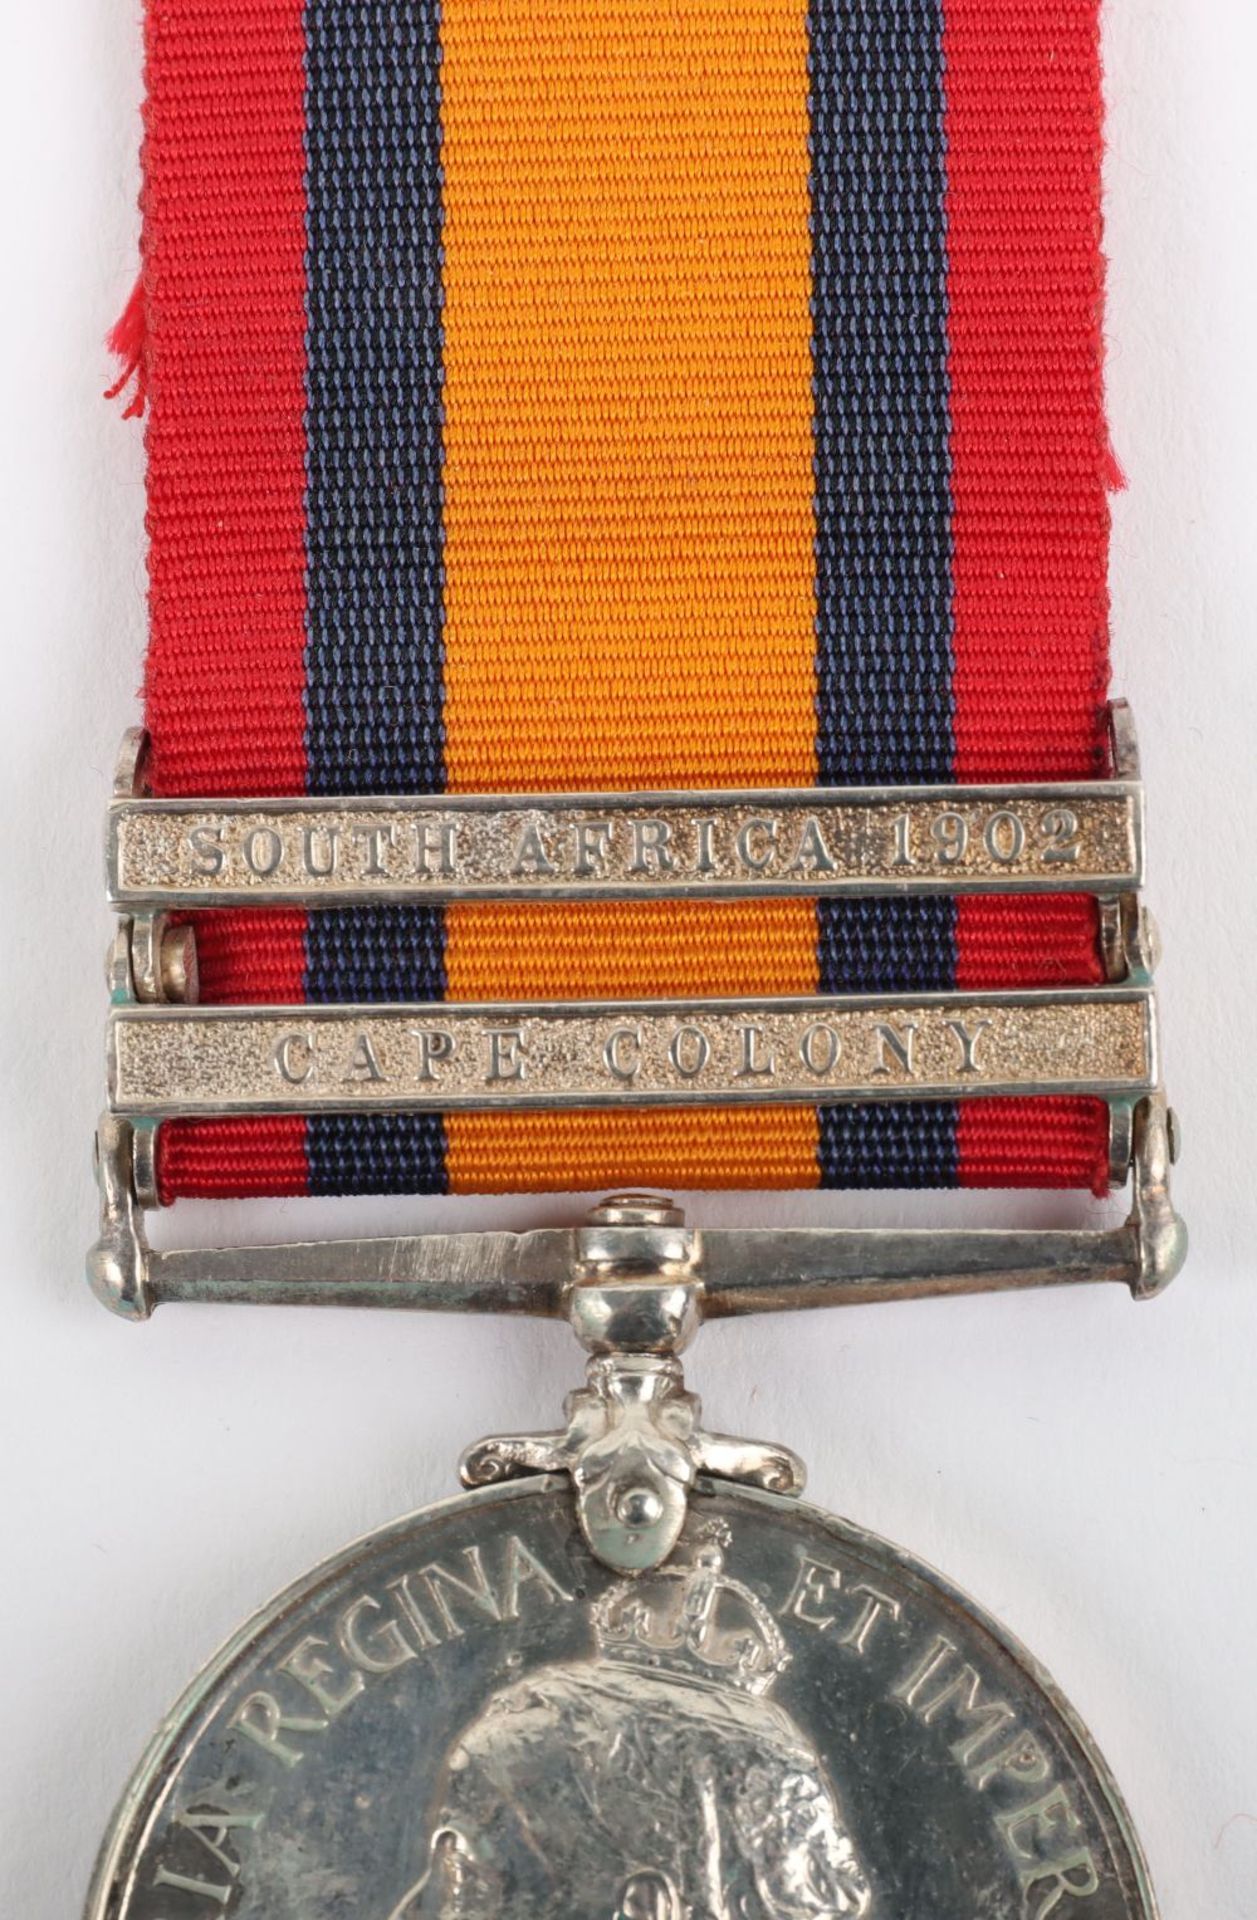 Queens South Africa Medal 4th Battalion the Durham Light Infantry - Image 3 of 4